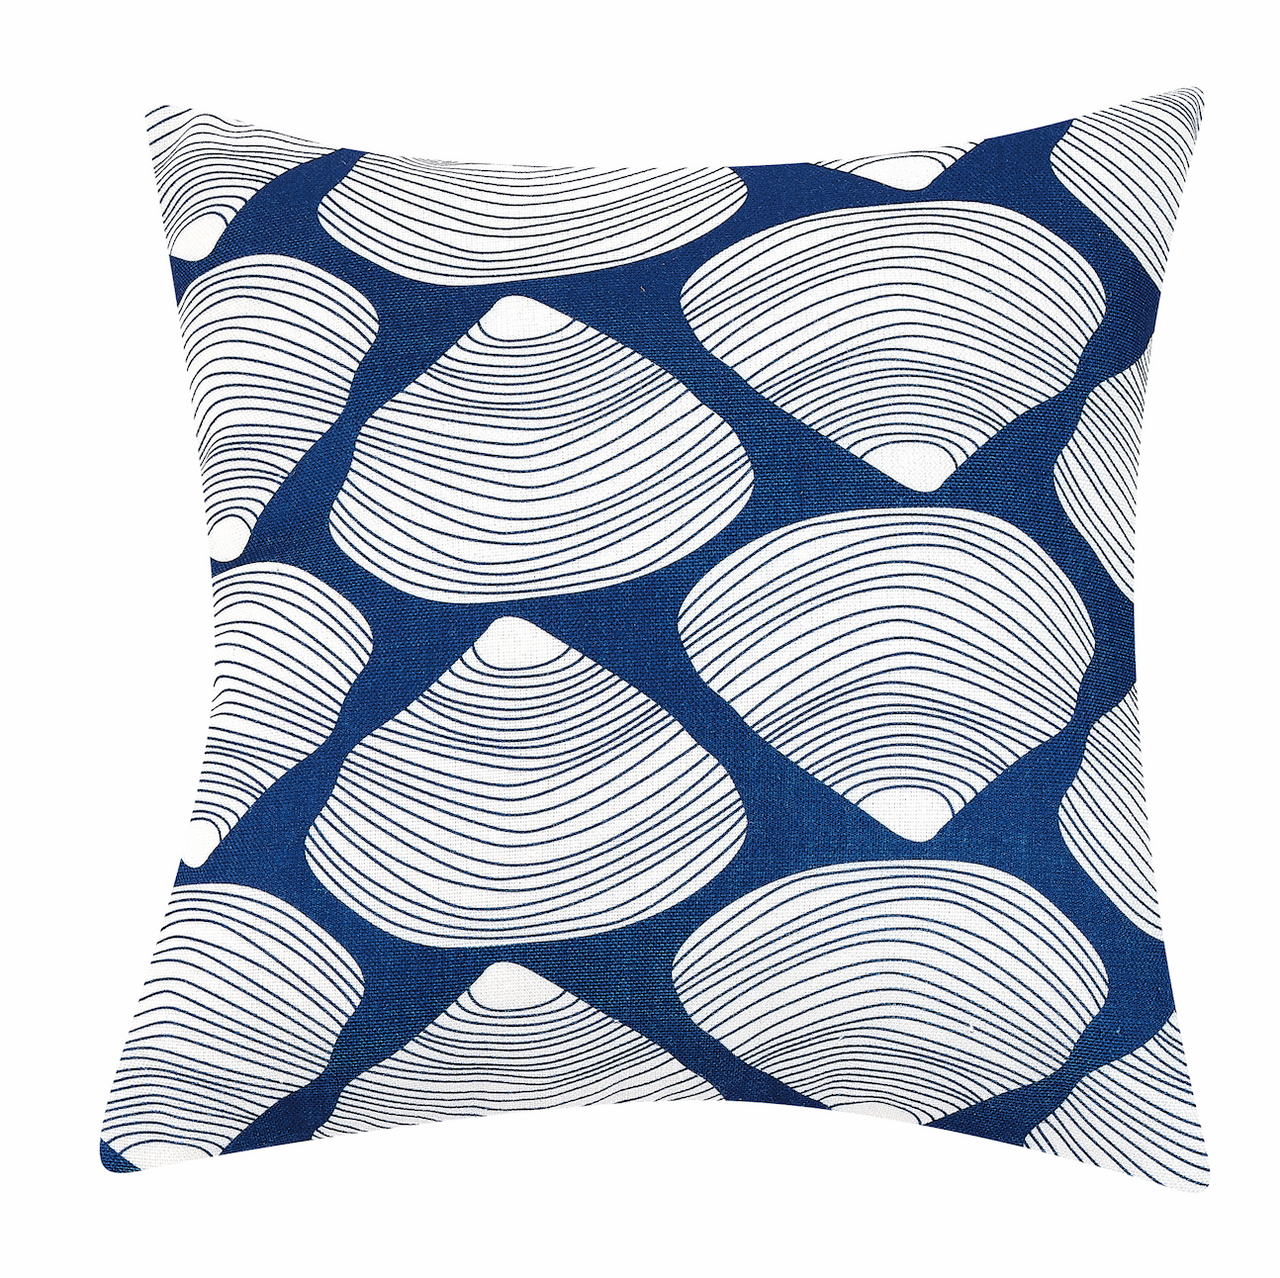 Clamshell Printed Pillow